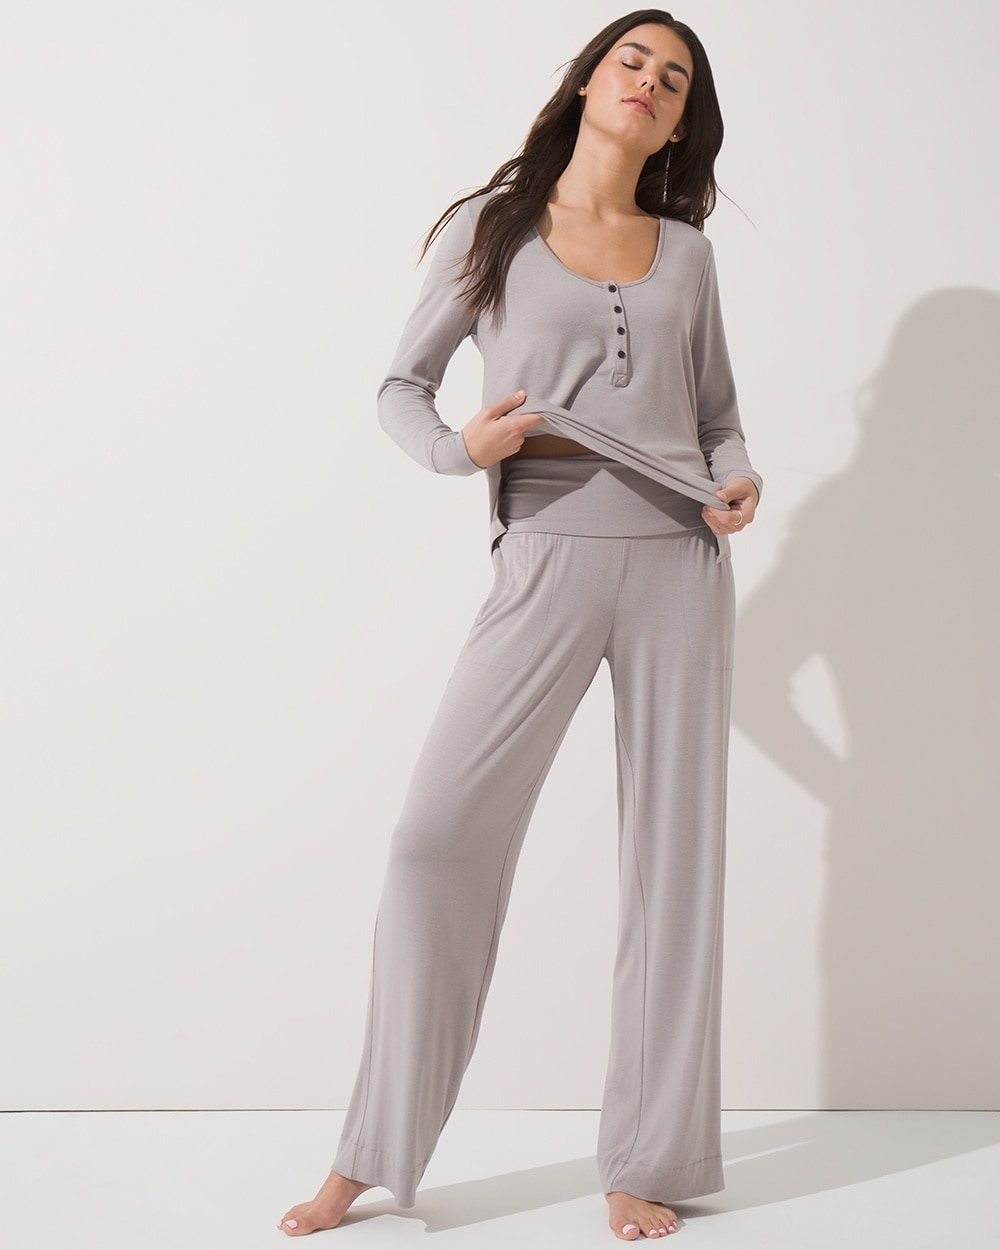 Everyday Bra-less Modal® Fabric Loungewear set in Gray (With in-built